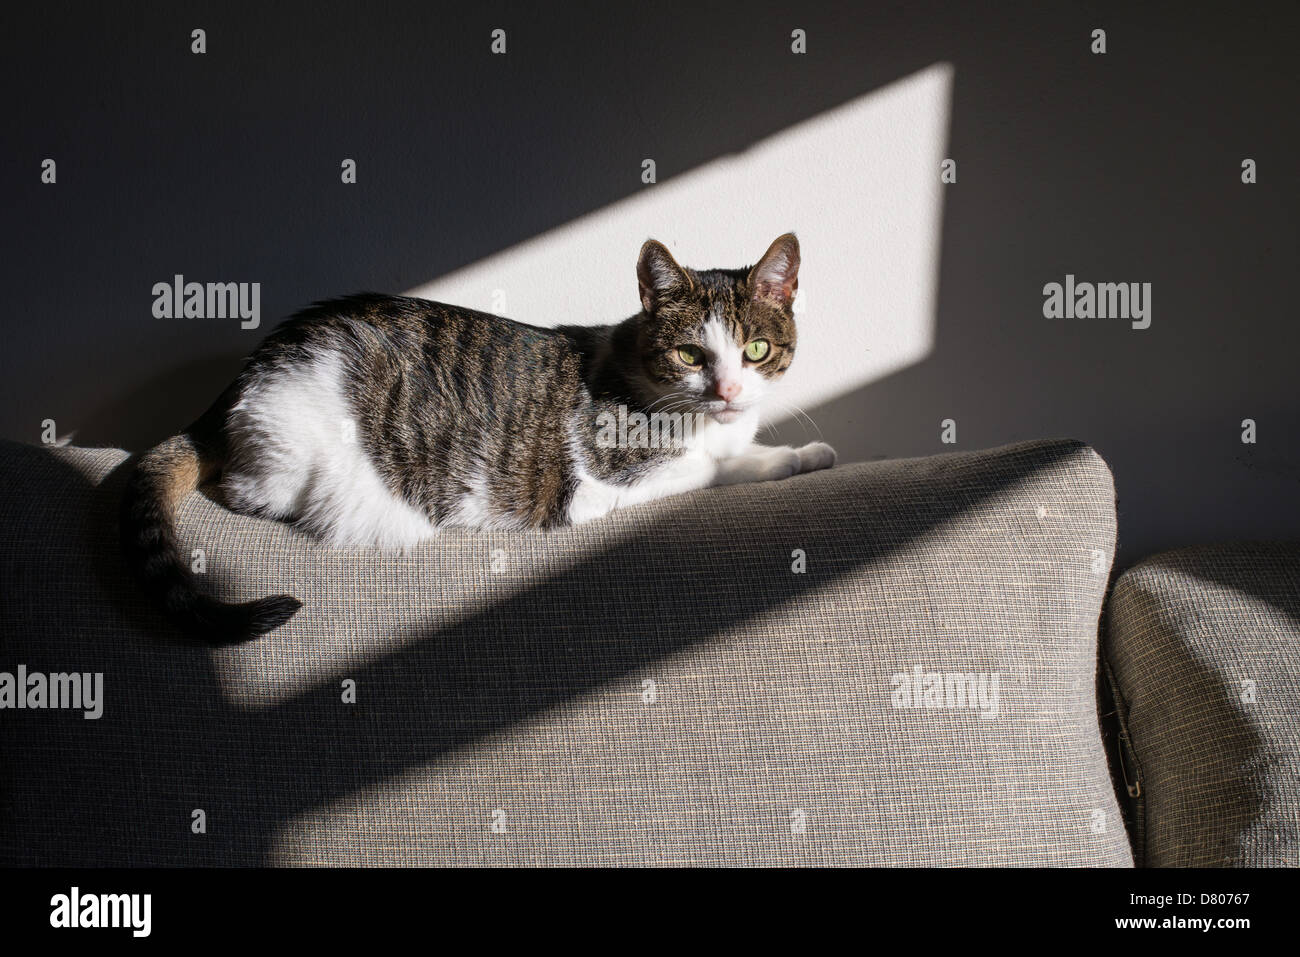 A cat on a couch in the sunlight. Stock Photo